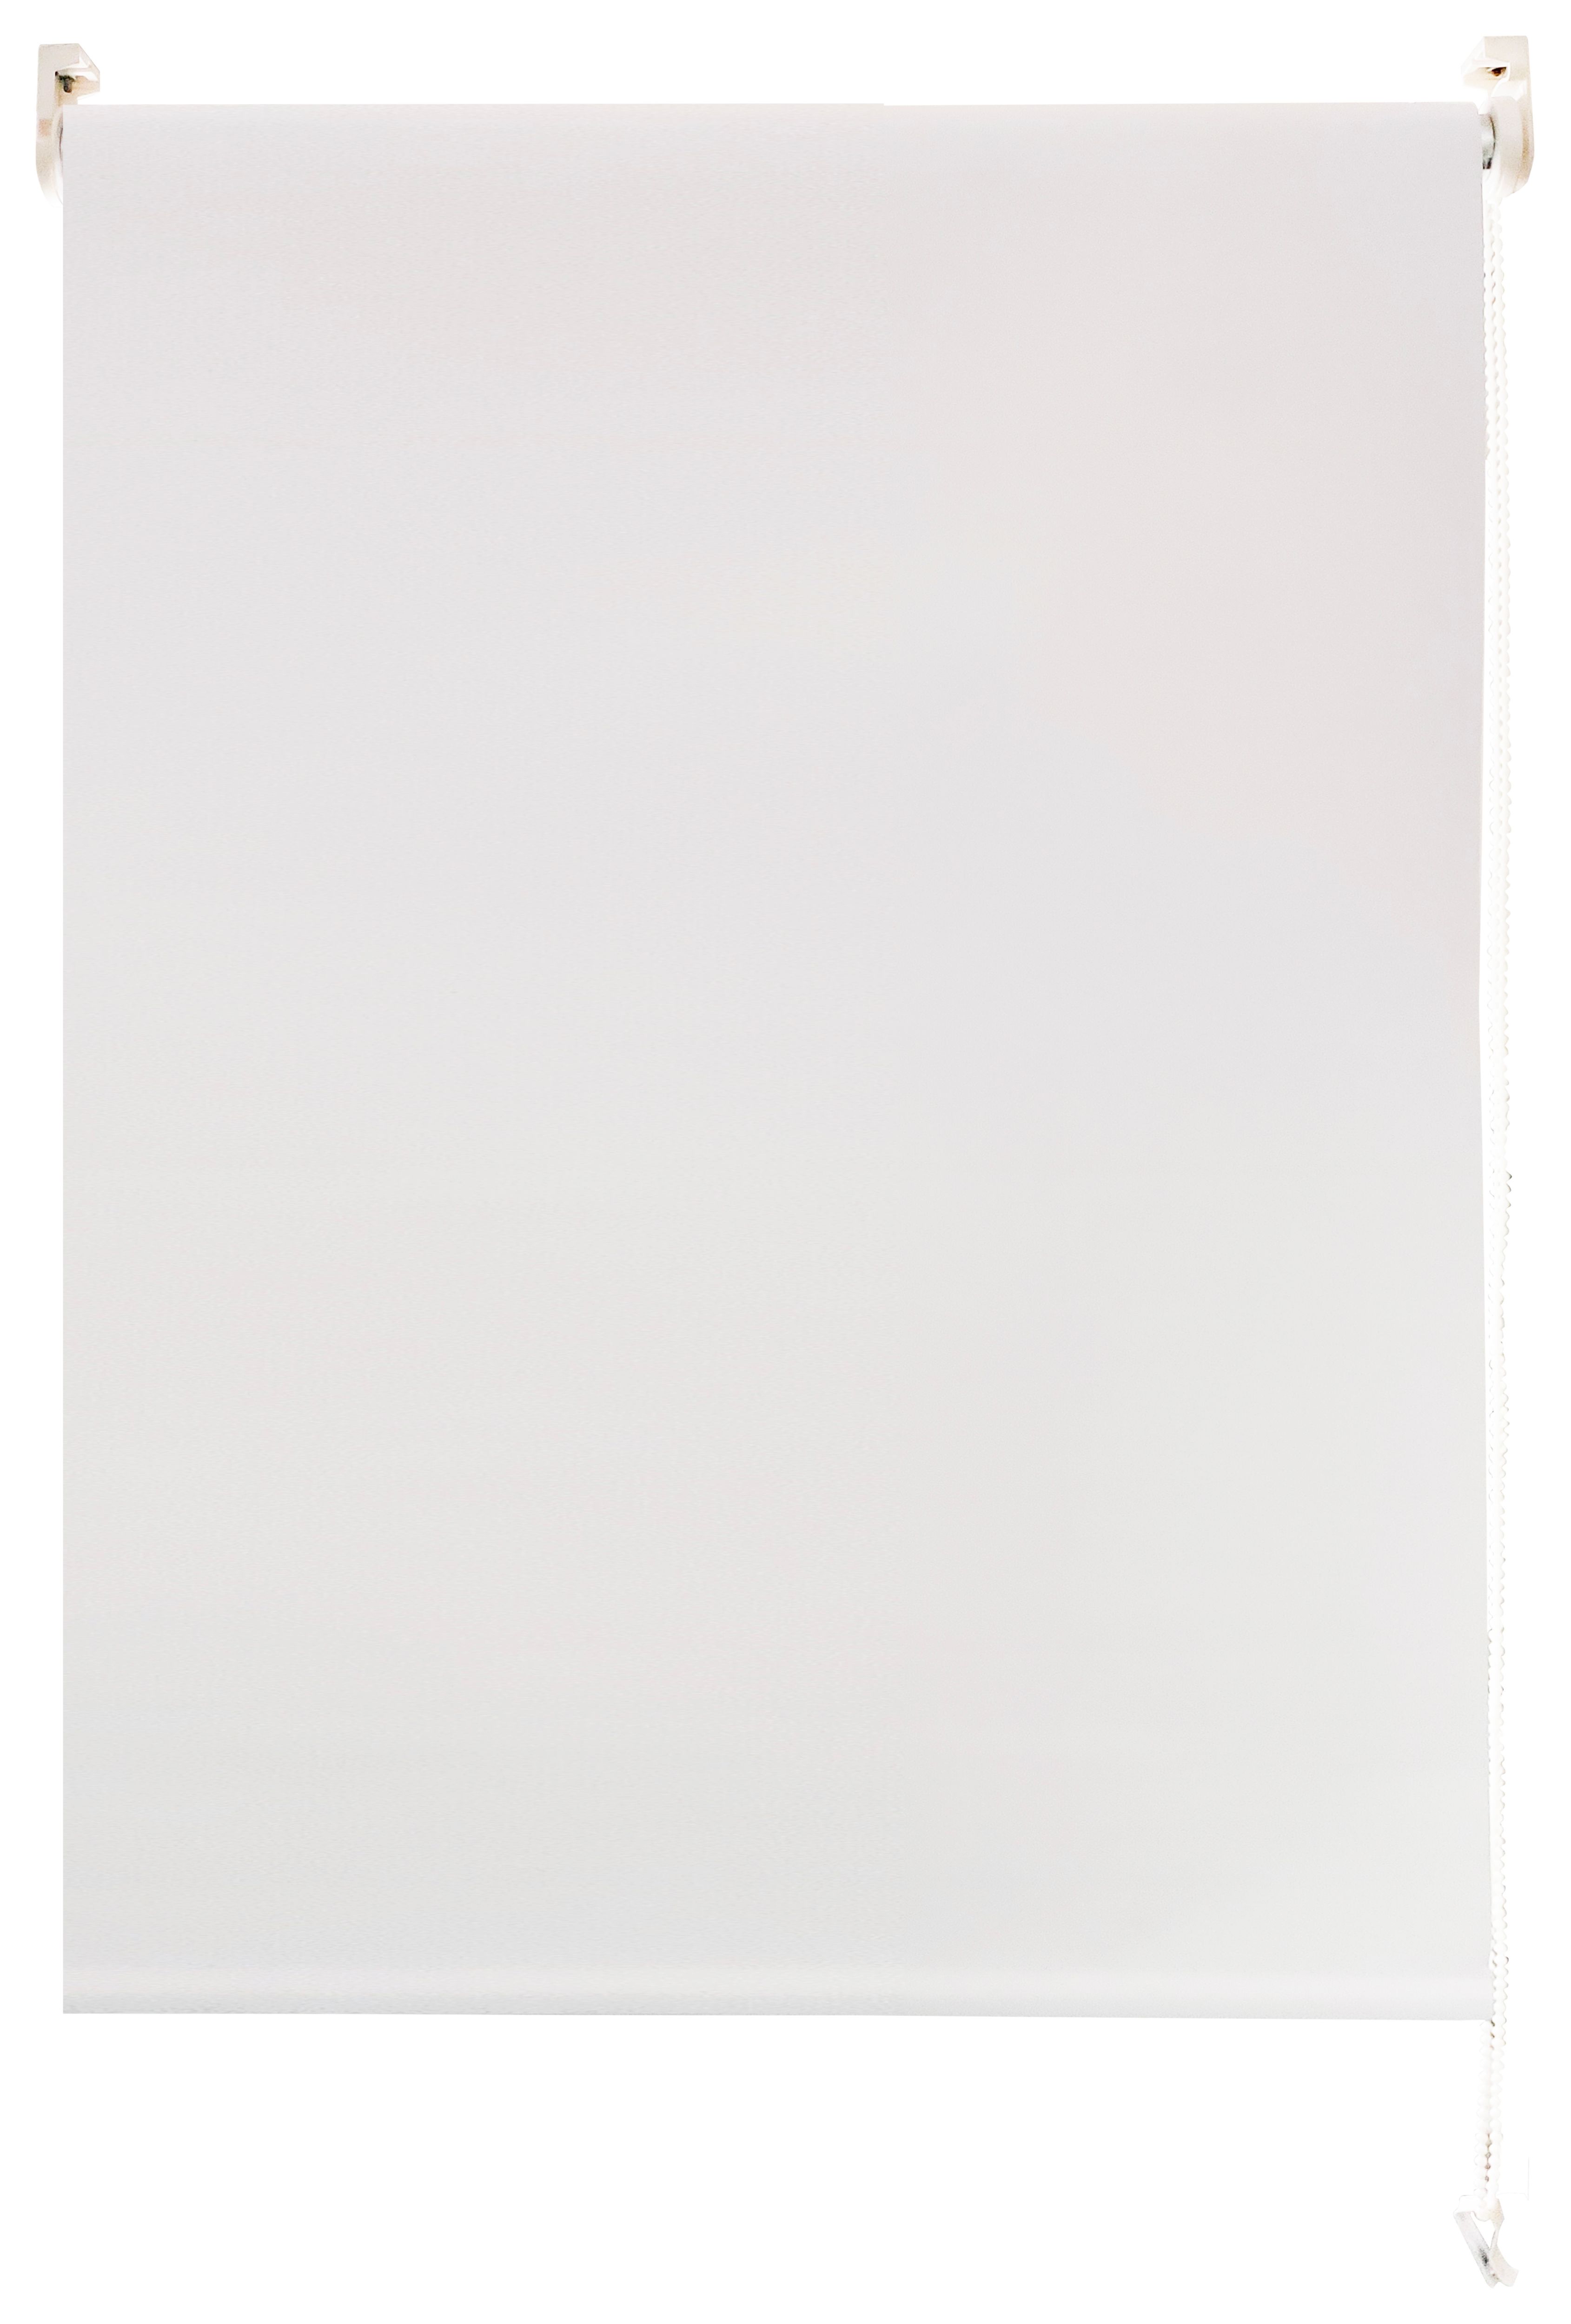 Image of Wickes Blackout Roller Blind White 90x170cm